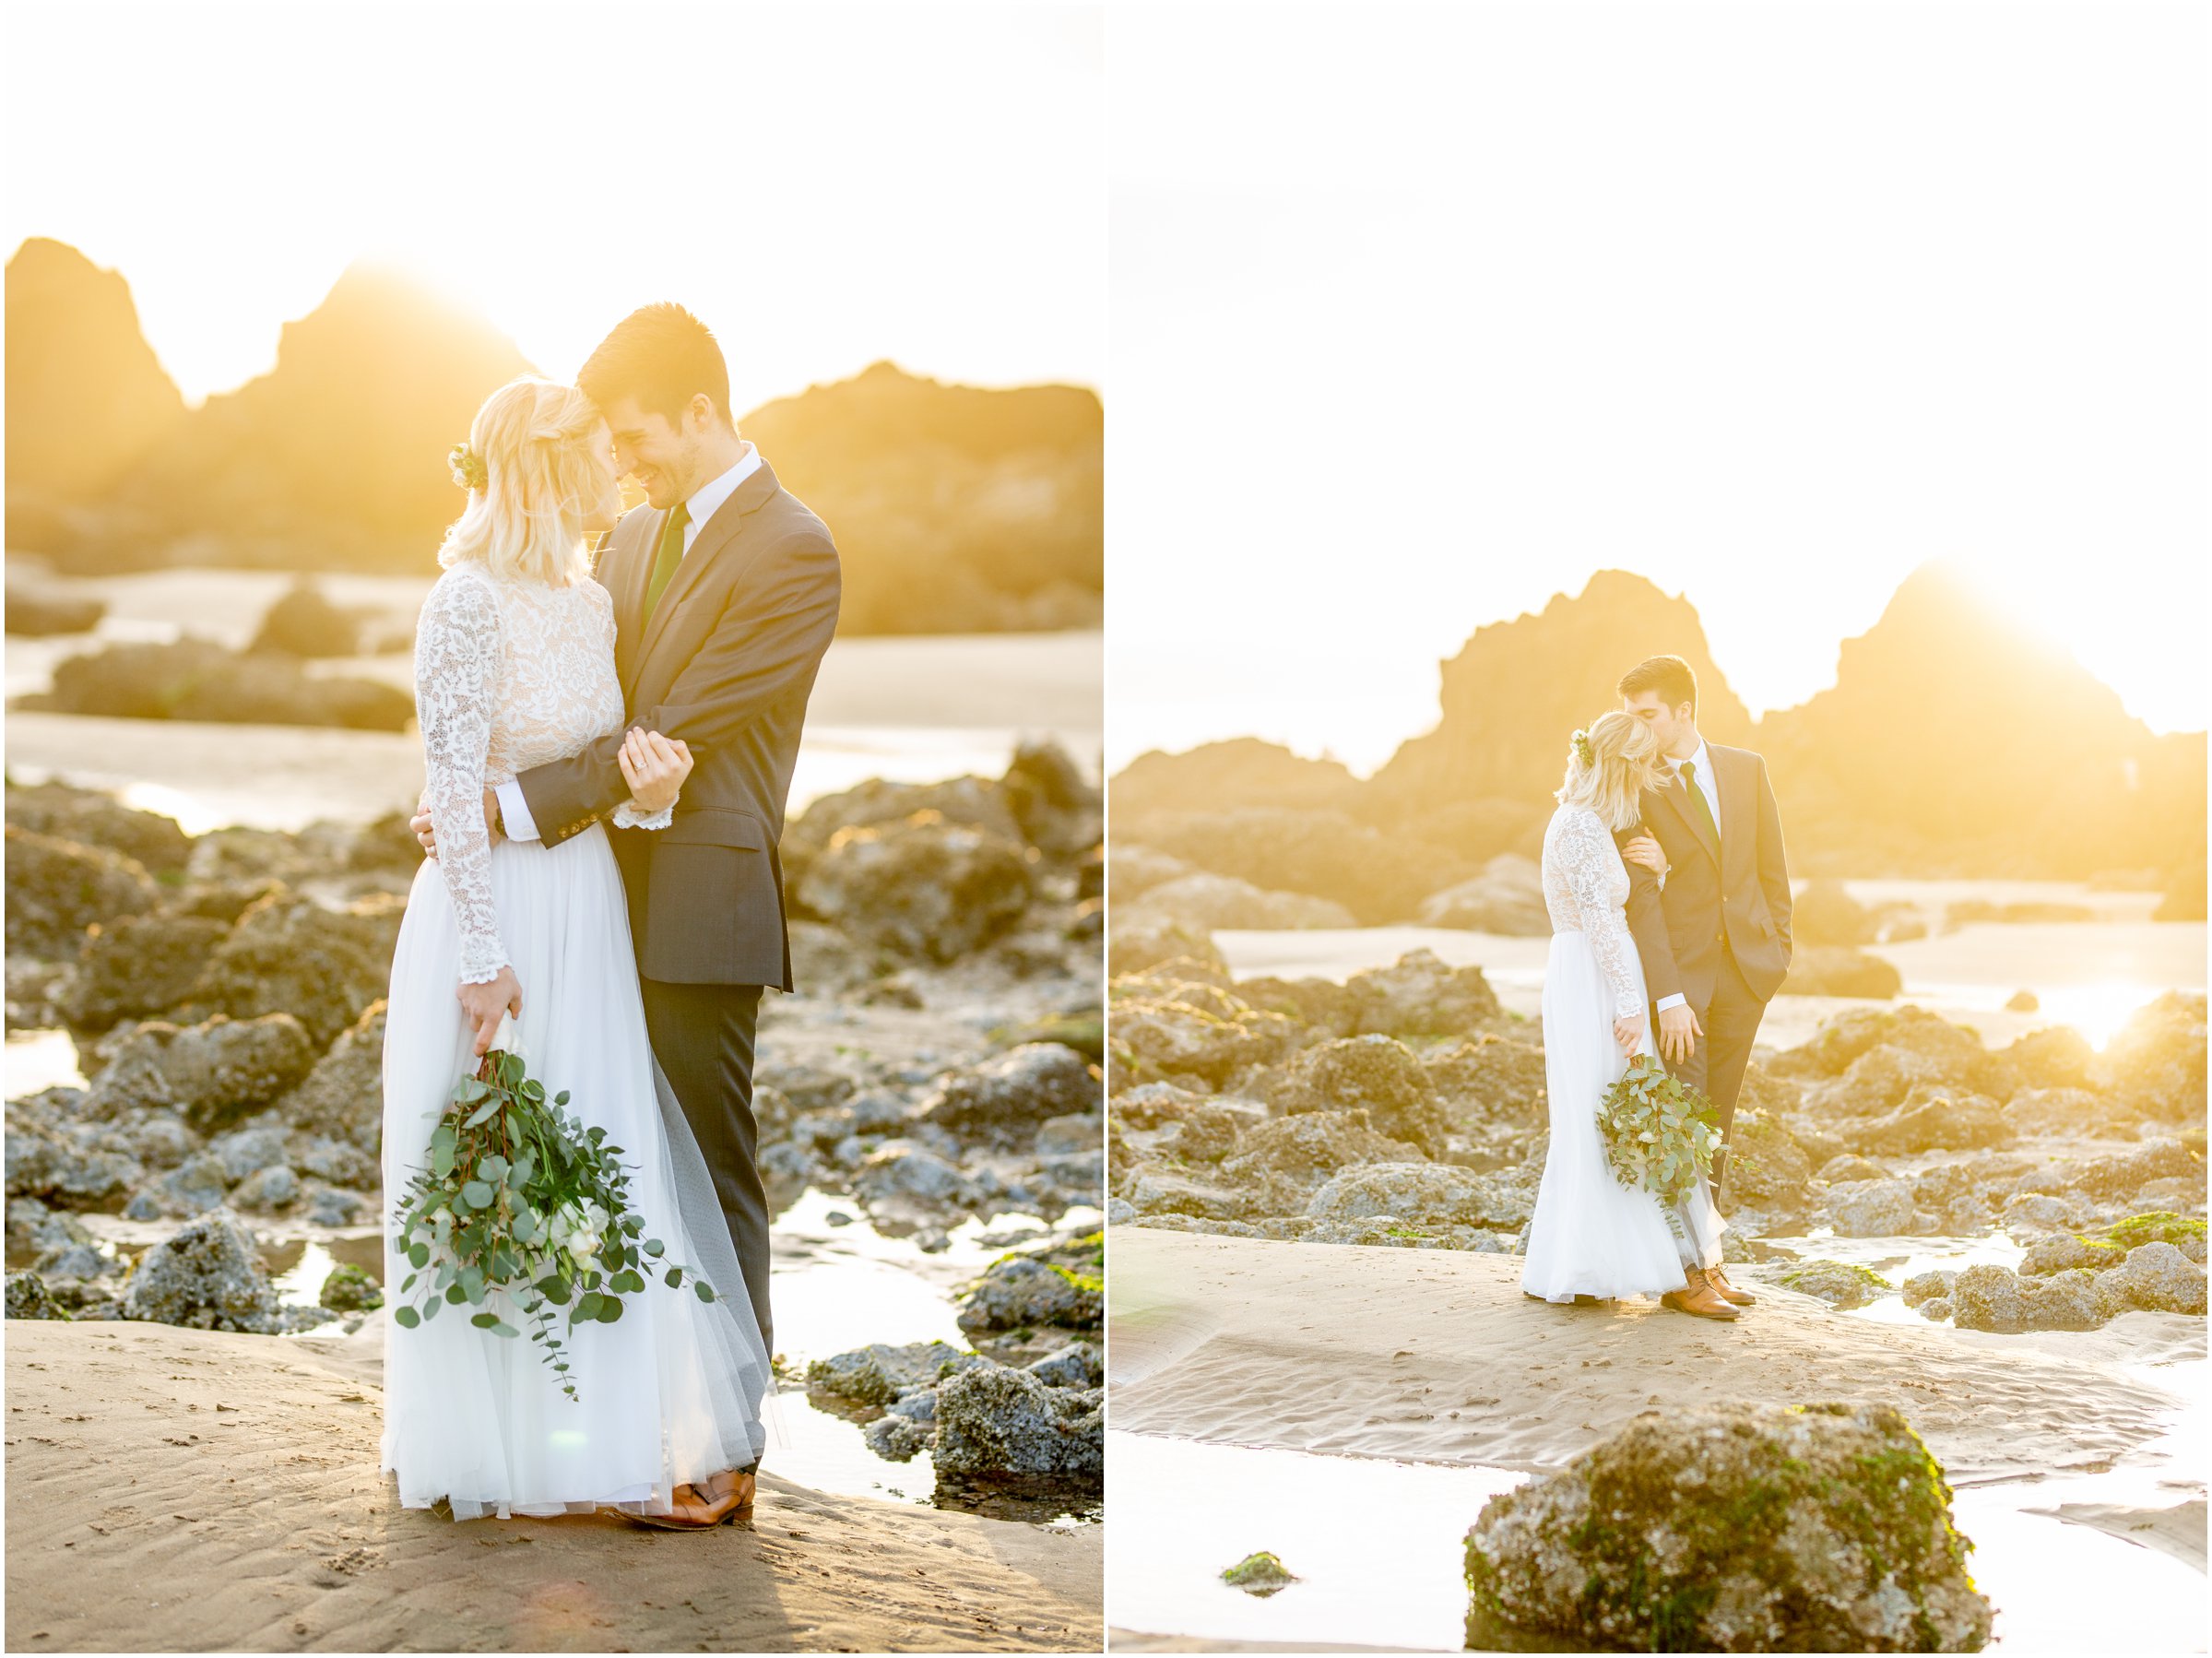 bride and groom snuggle on the beach as sun shines through the rocks during sunet by cannon beach elopement photographer